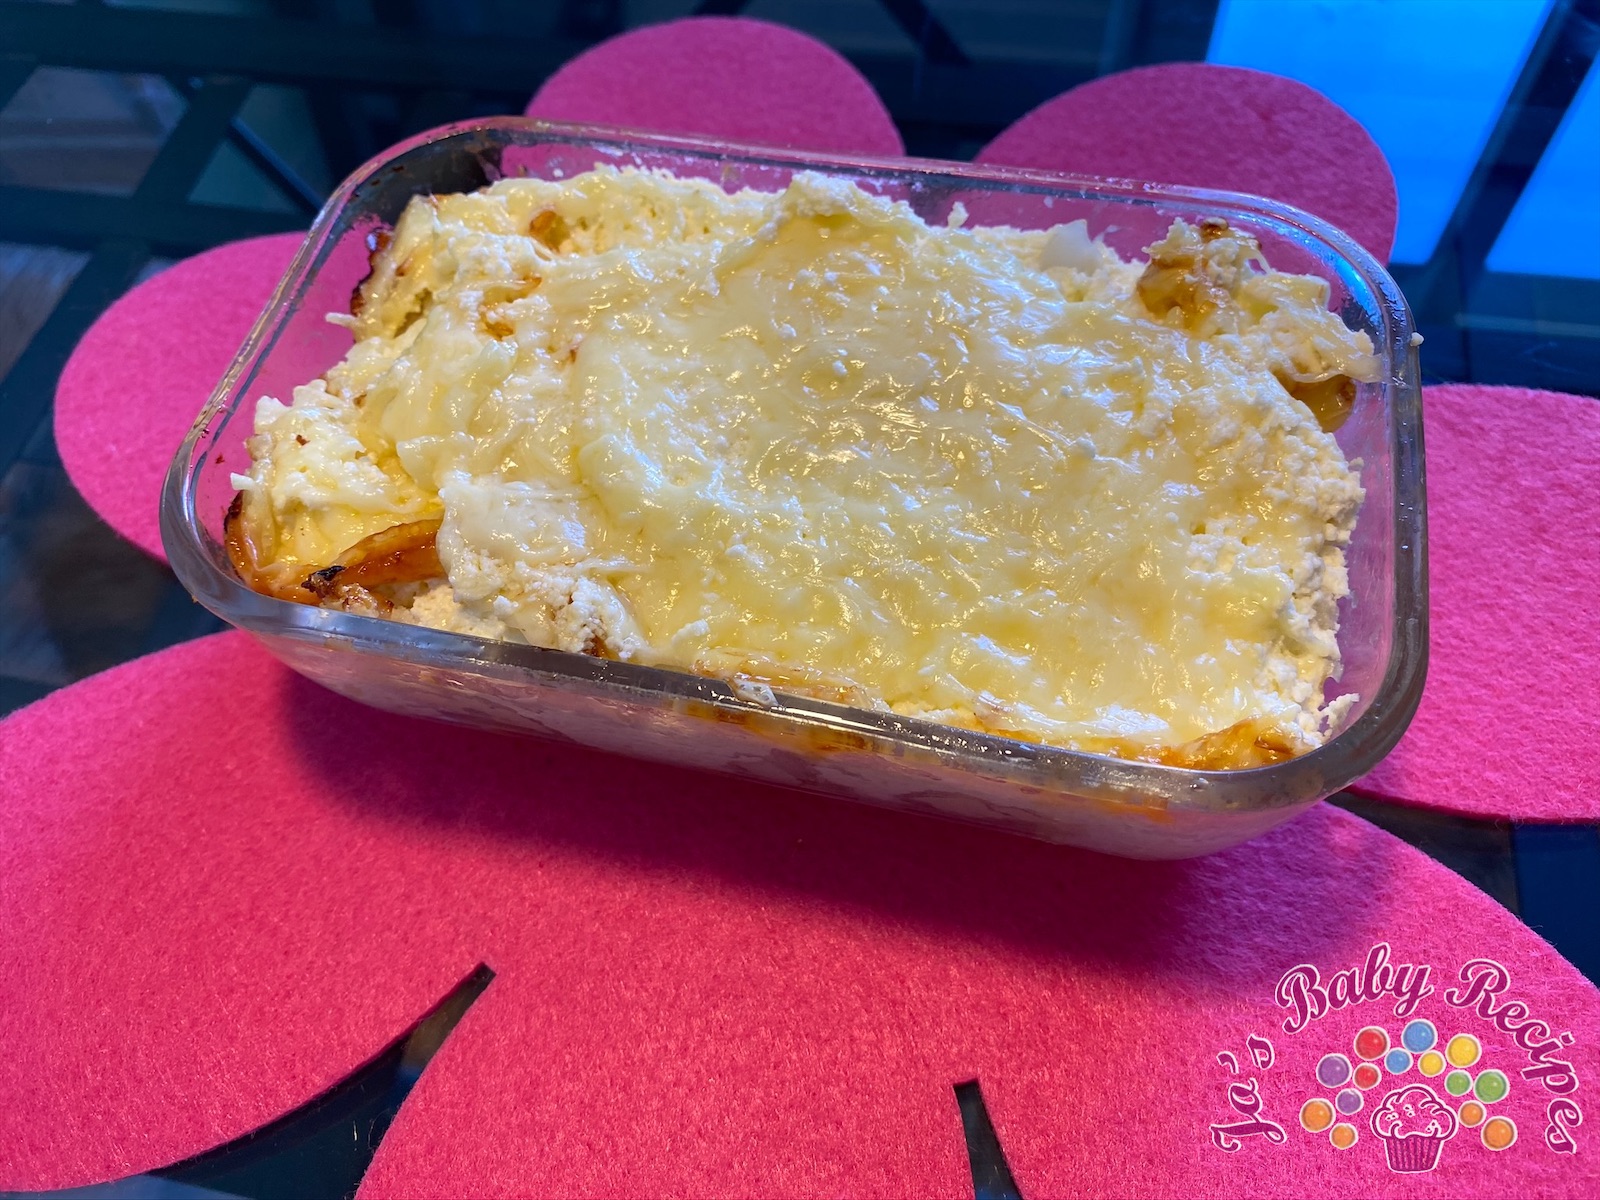 Cauliflower with cheese in the oven